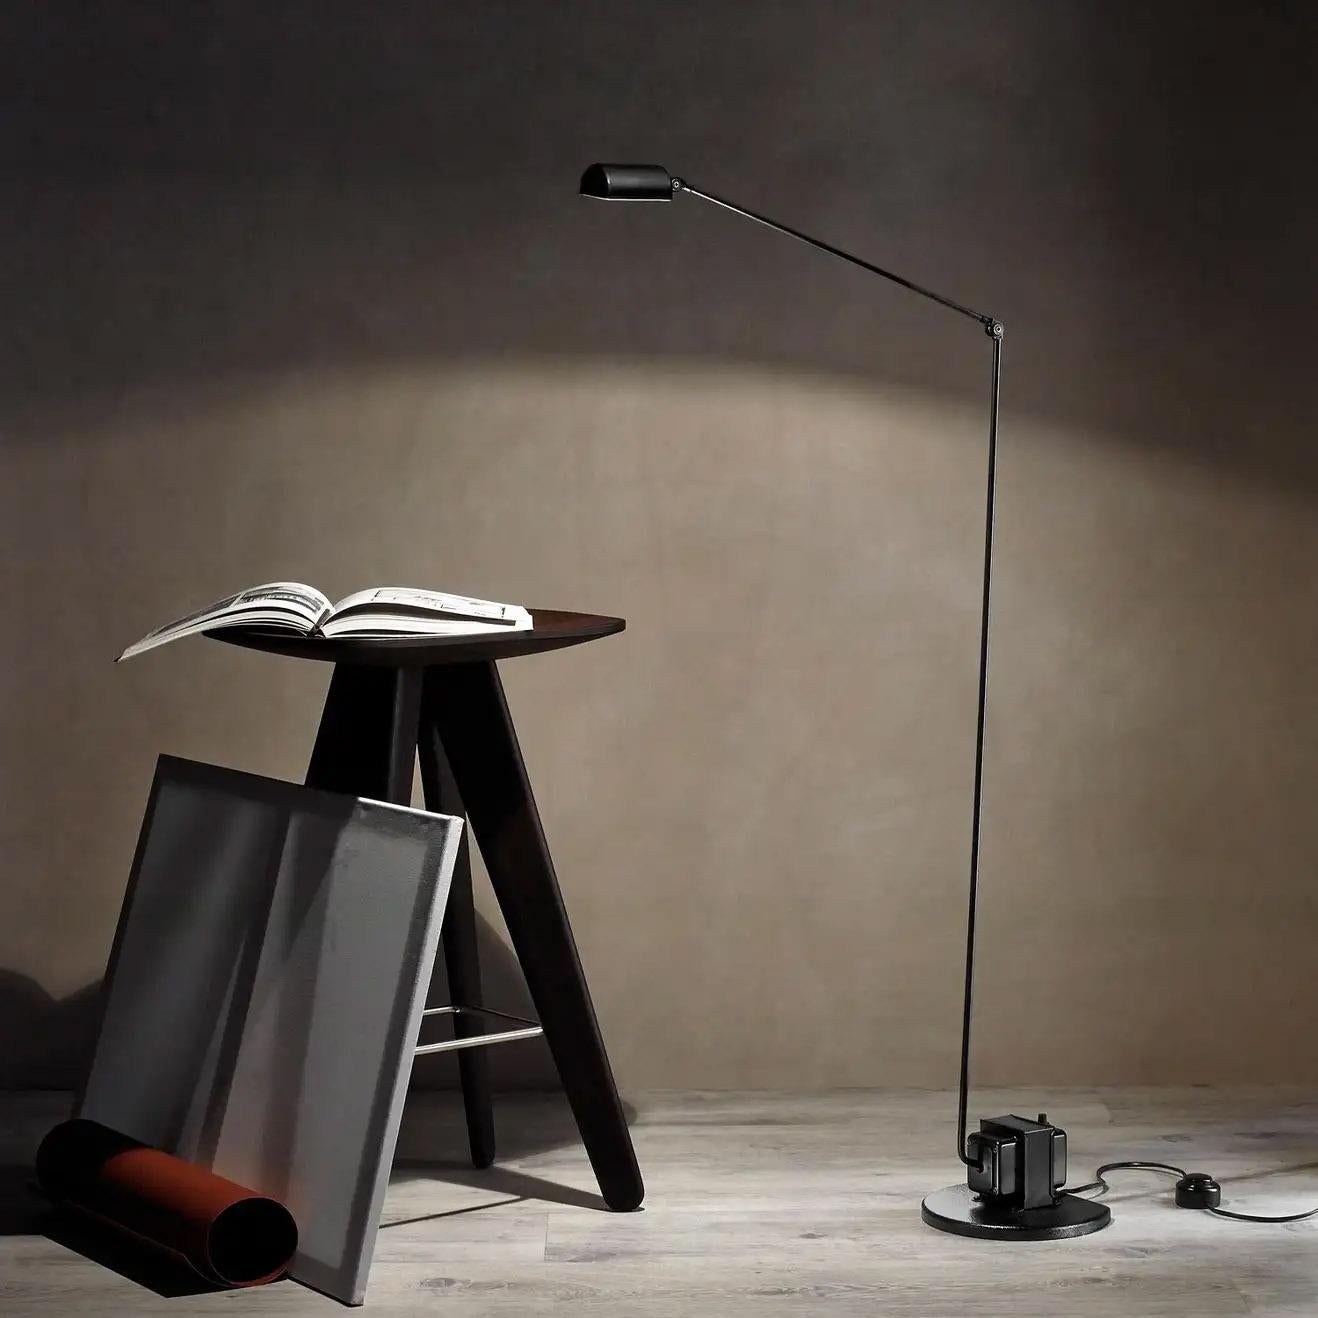 Lumina Daphine Terra LED table lamp in soft touch black by Tommaso Cimini

Undisputed emblem of elegance and functionality, the Daphine represents the essence of Lumina.
The idea behind the creation of the Daphine lamp is as simple as it is